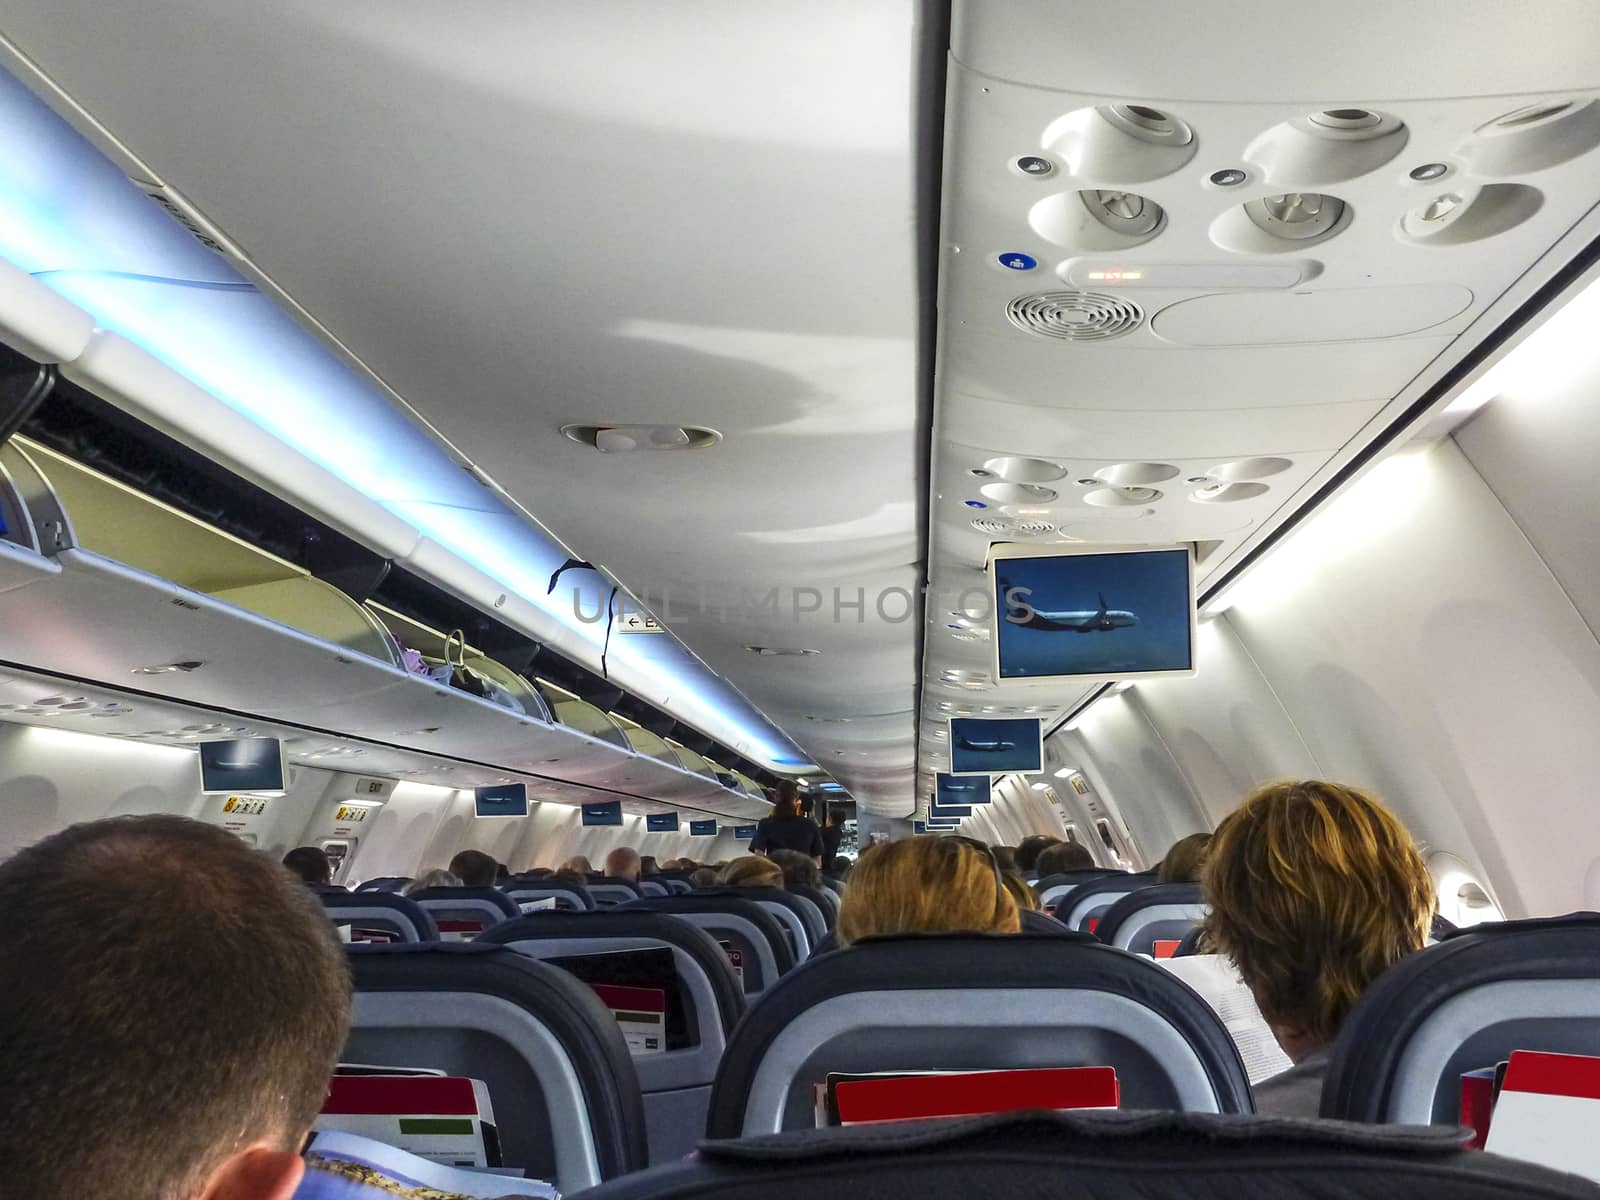 Air Berlin Boeing 737-800 interior taking off with passengers seated and perspective view of the seats and overheads. All trademarks are deleted.